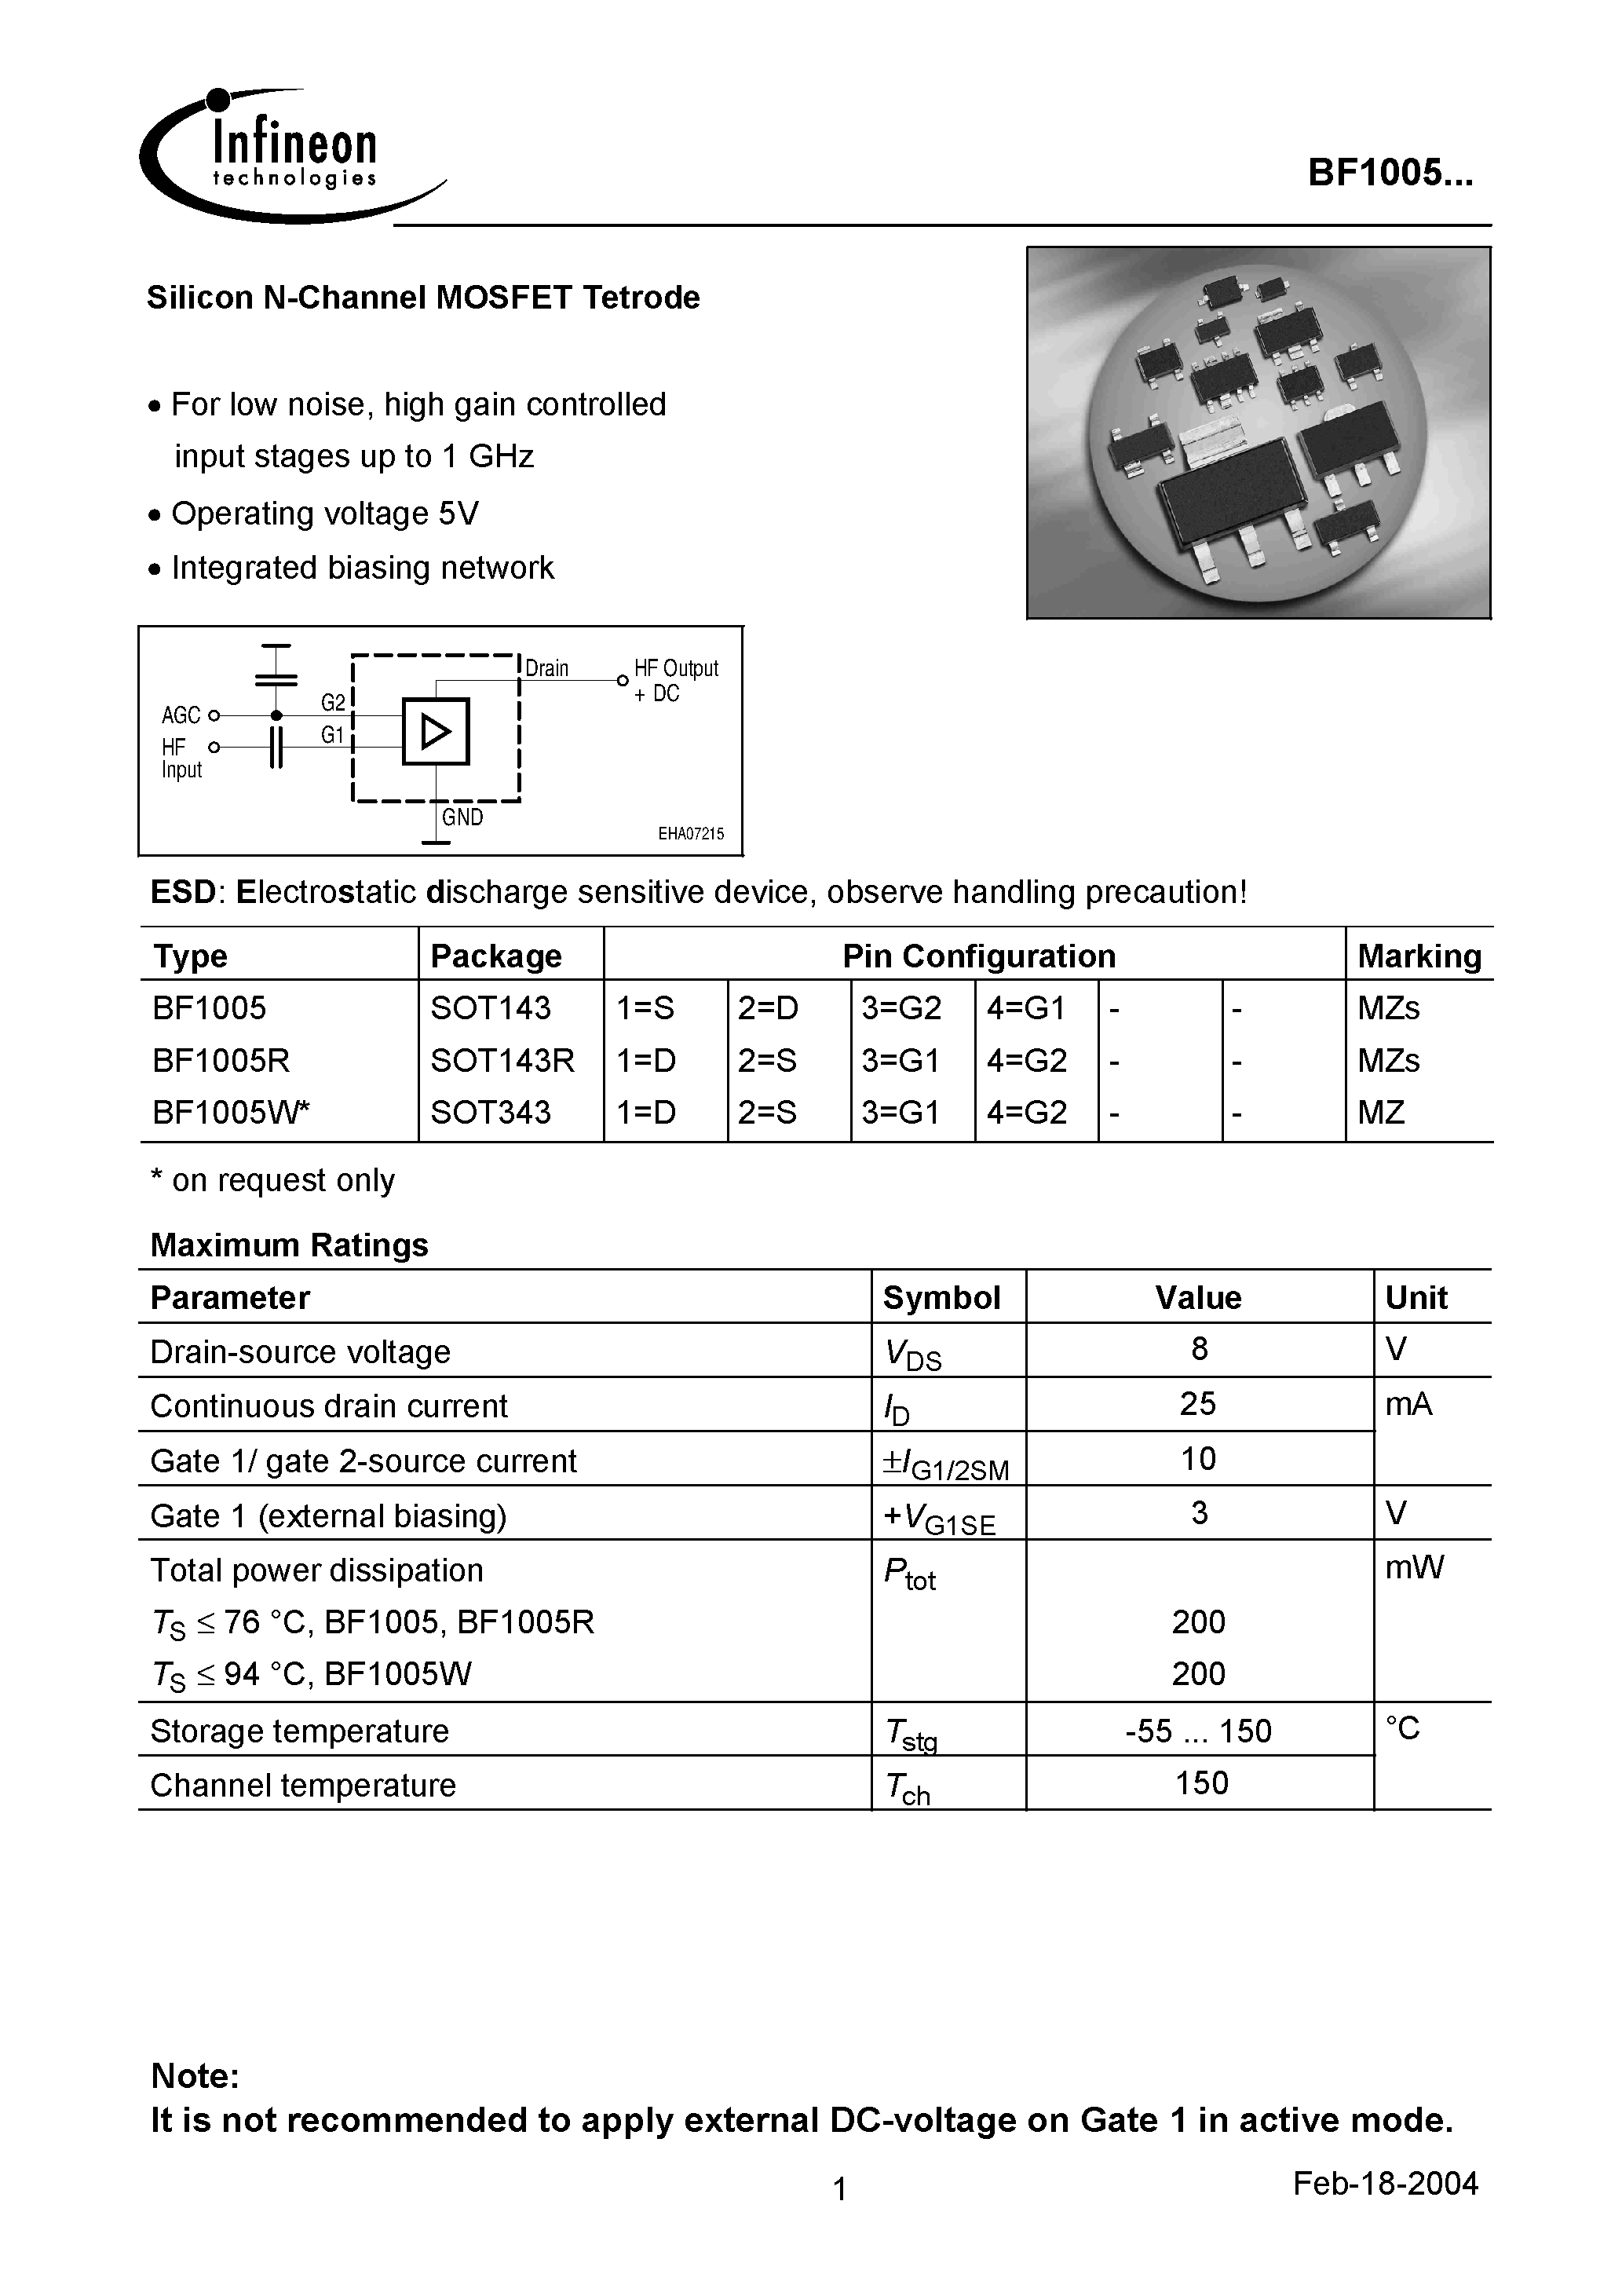 Даташит BF1005 - Silicon N-Channel MOSFET Tetrode страница 1